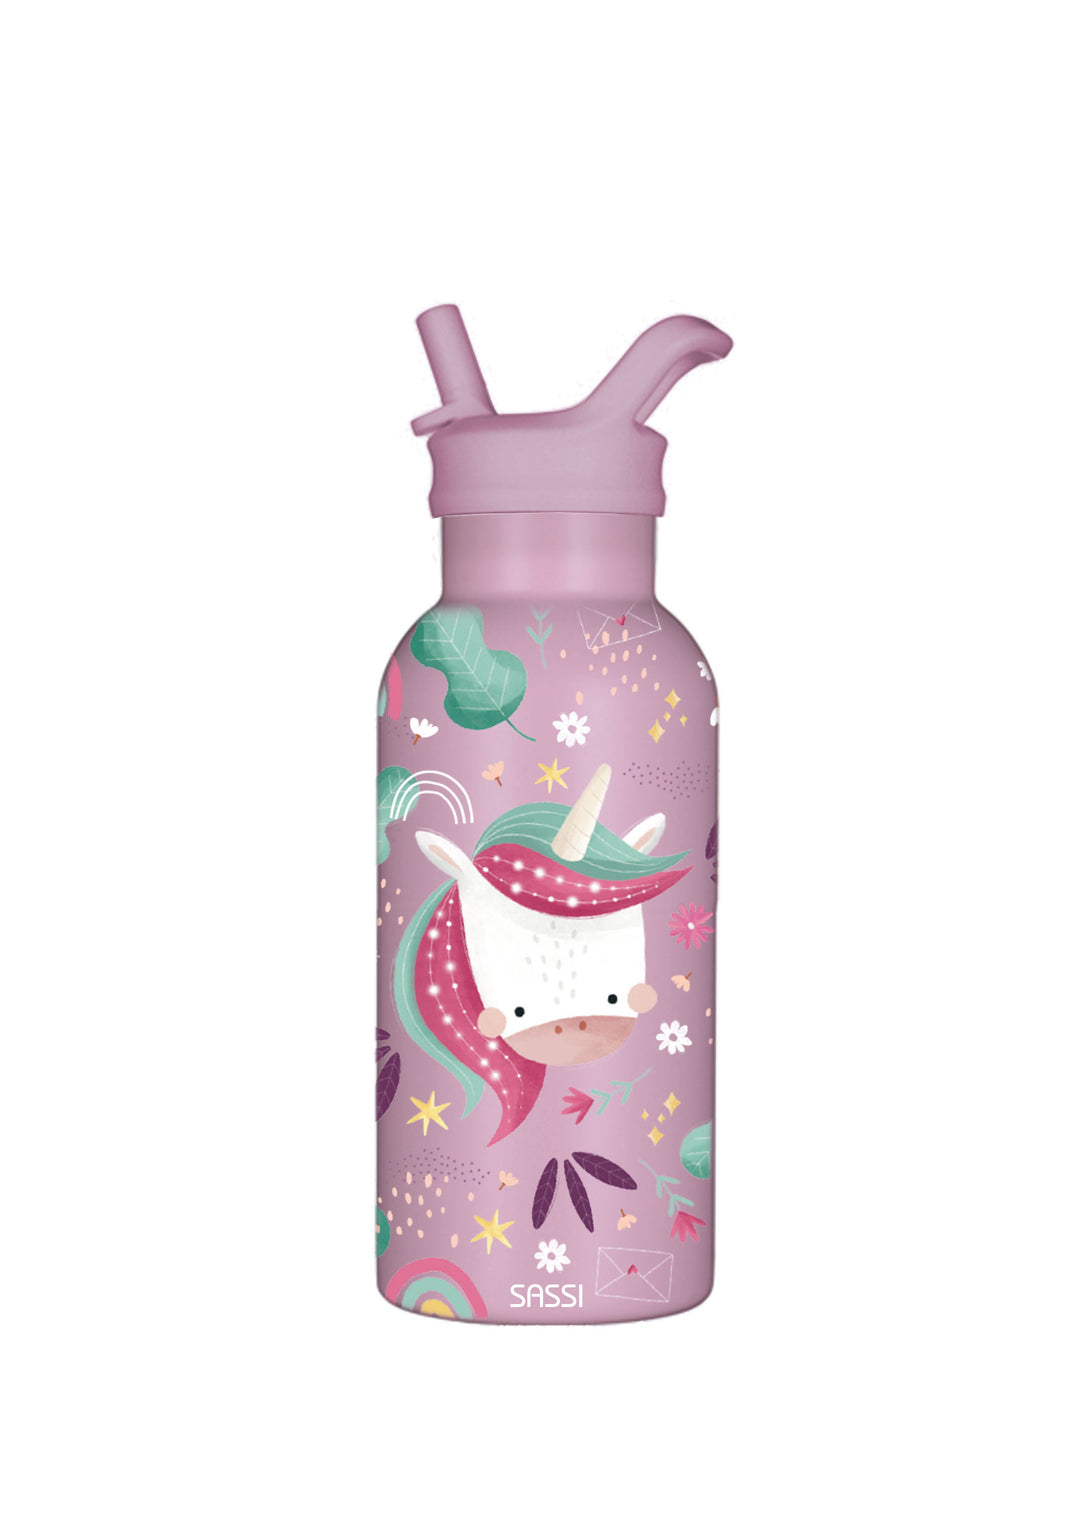 Sassi Vacuum Insulated Stainless Steel Drink Bottle 350 ml - Sparkly The Unicorn